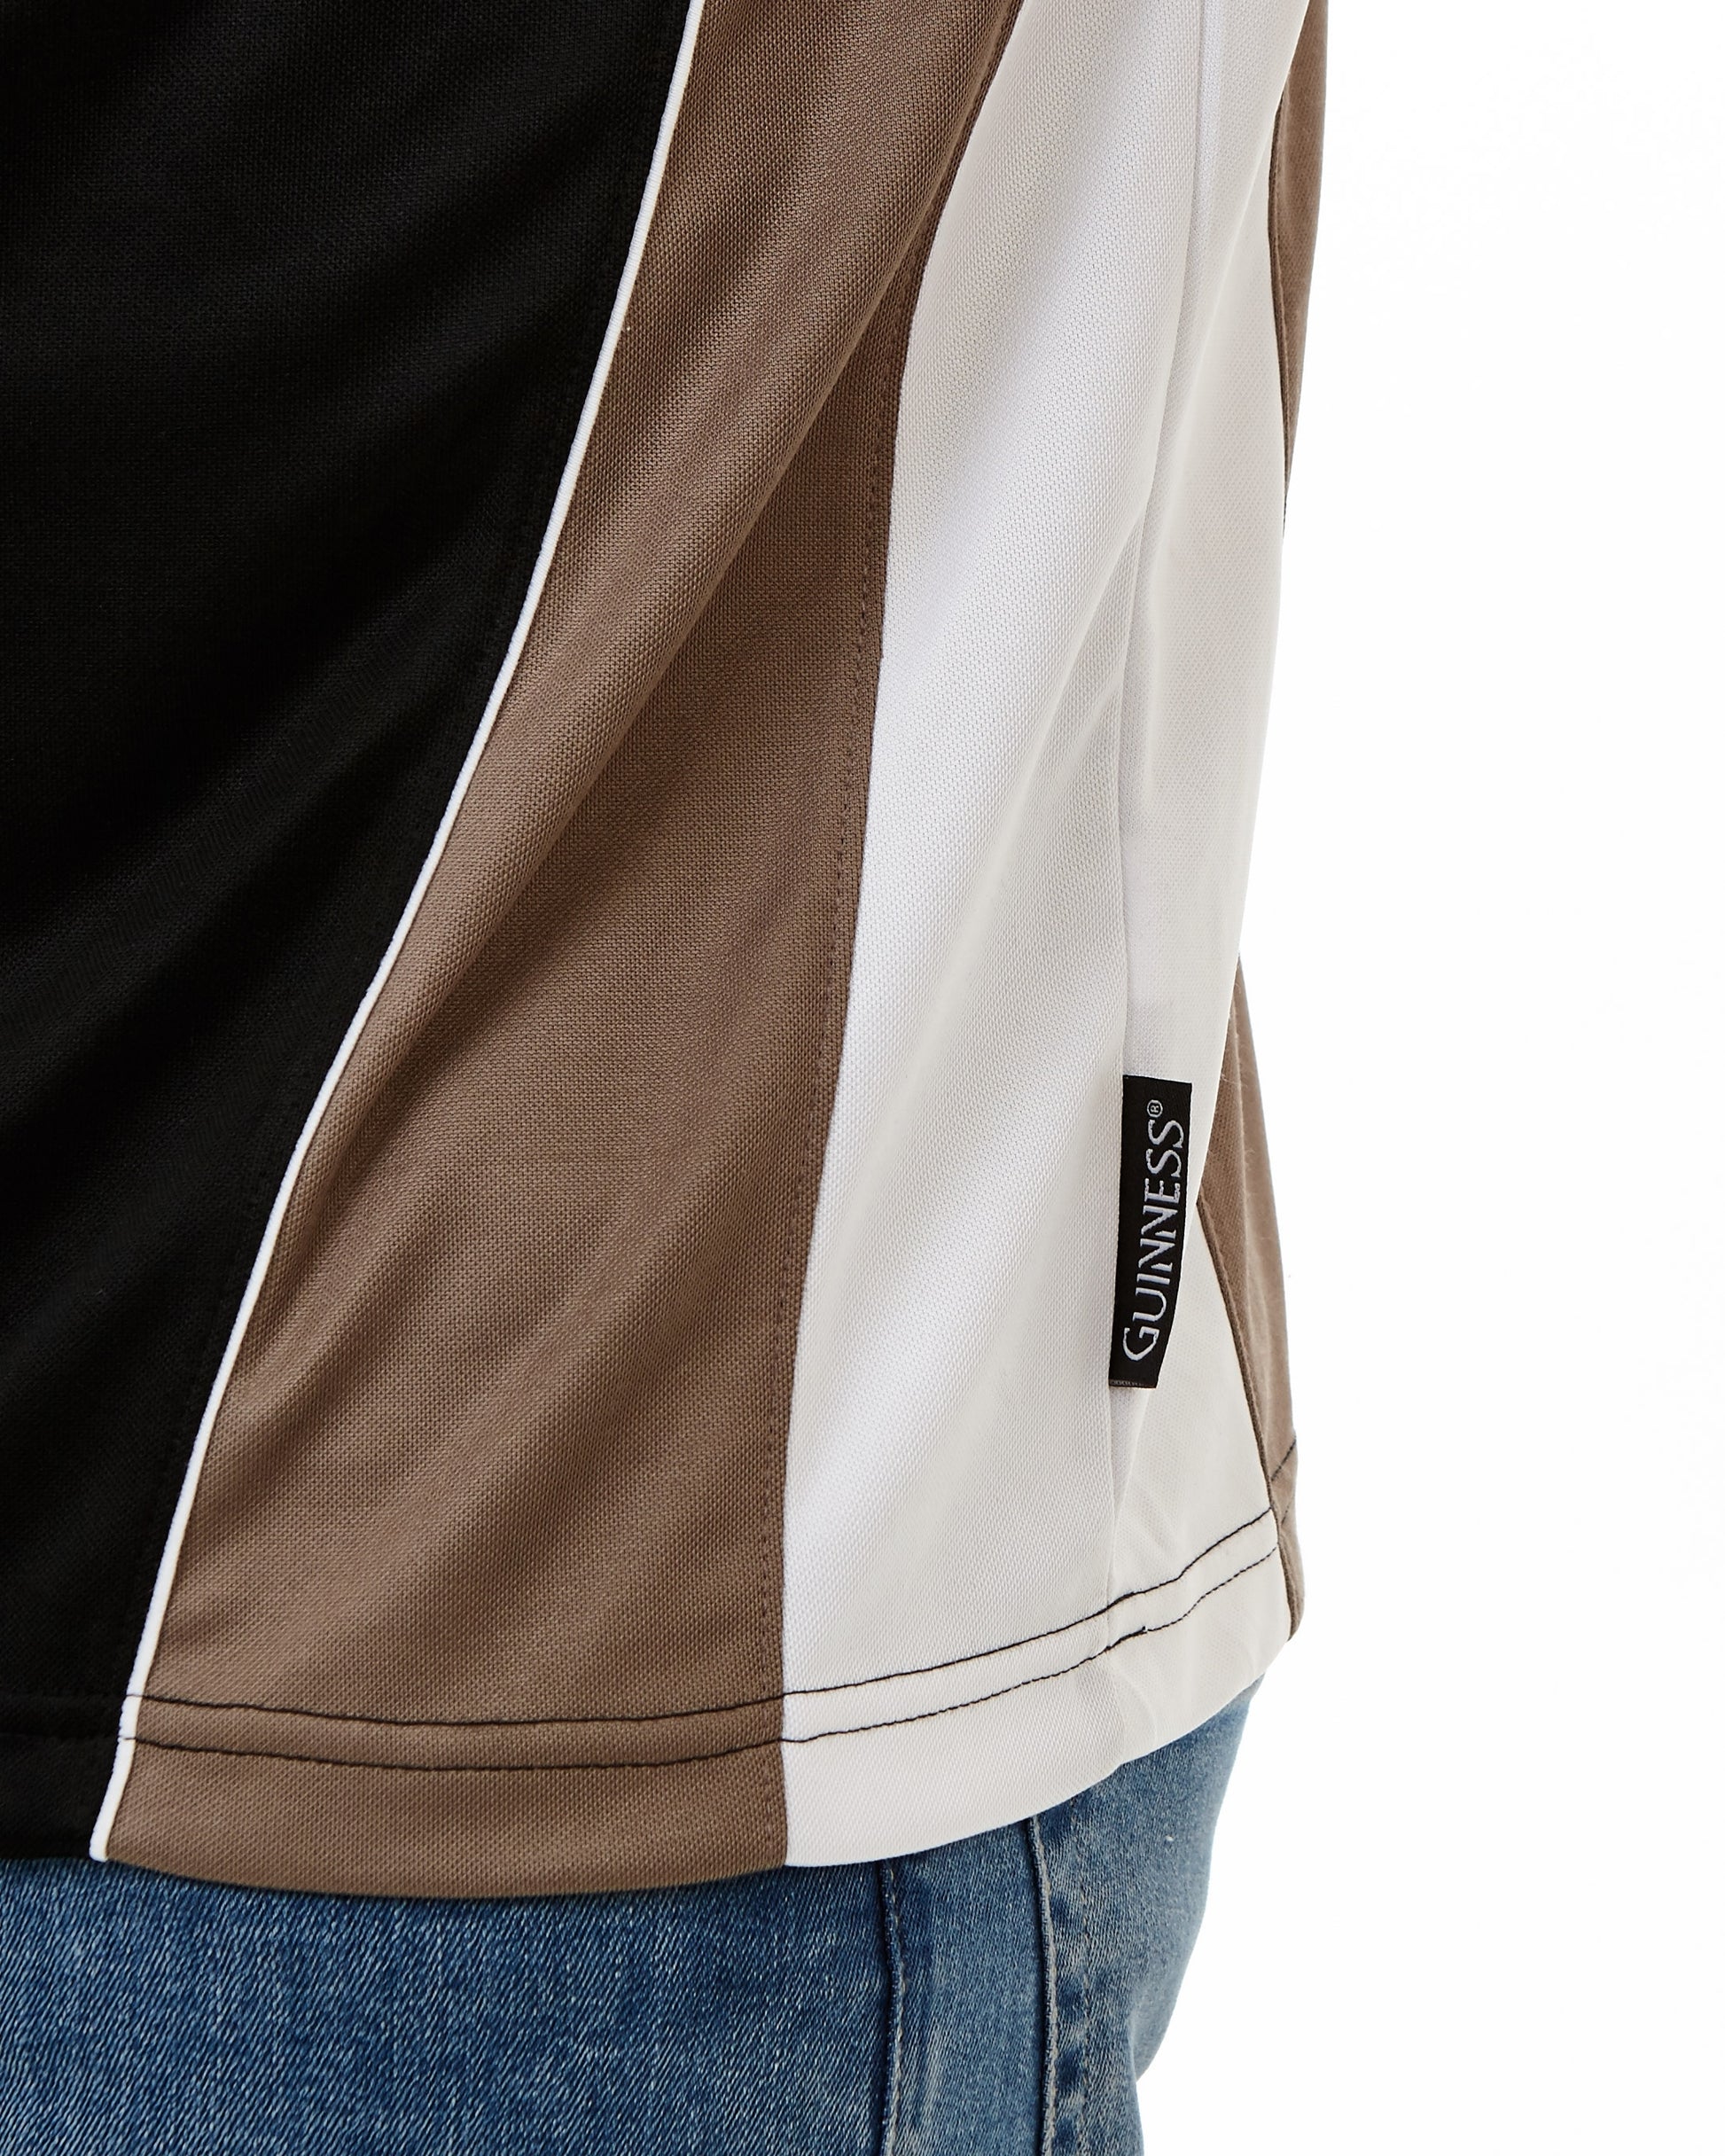 Guinness Brown Paneled Performance Golf Shirt with Official Guinness Harp Embroidery Logo